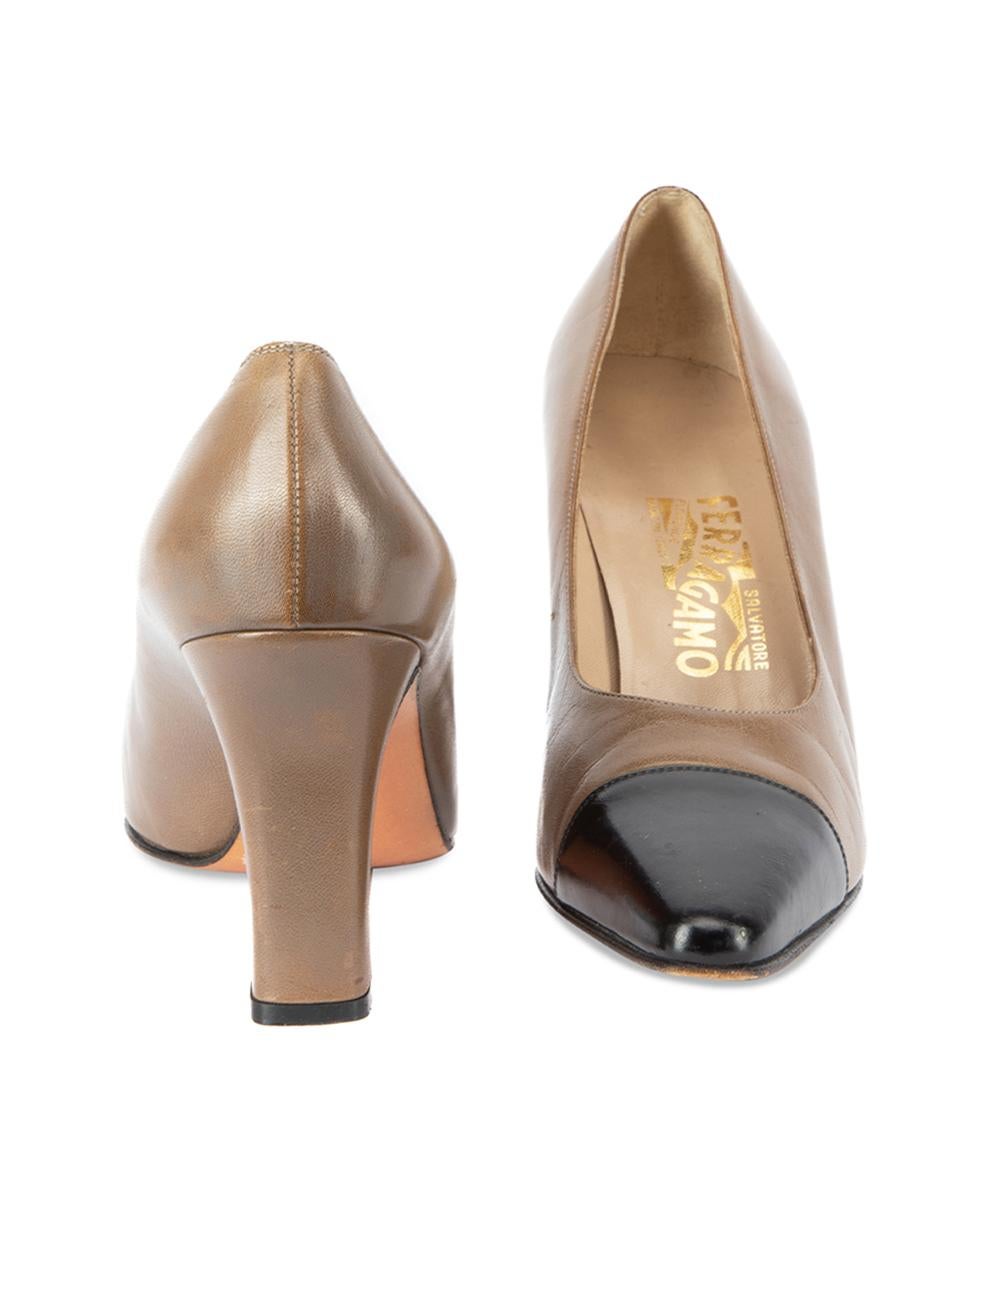 Salvatore Ferragamo Women's Brown Leather Pointed Toe Cap Pumps In Excellent Condition For Sale In London, GB